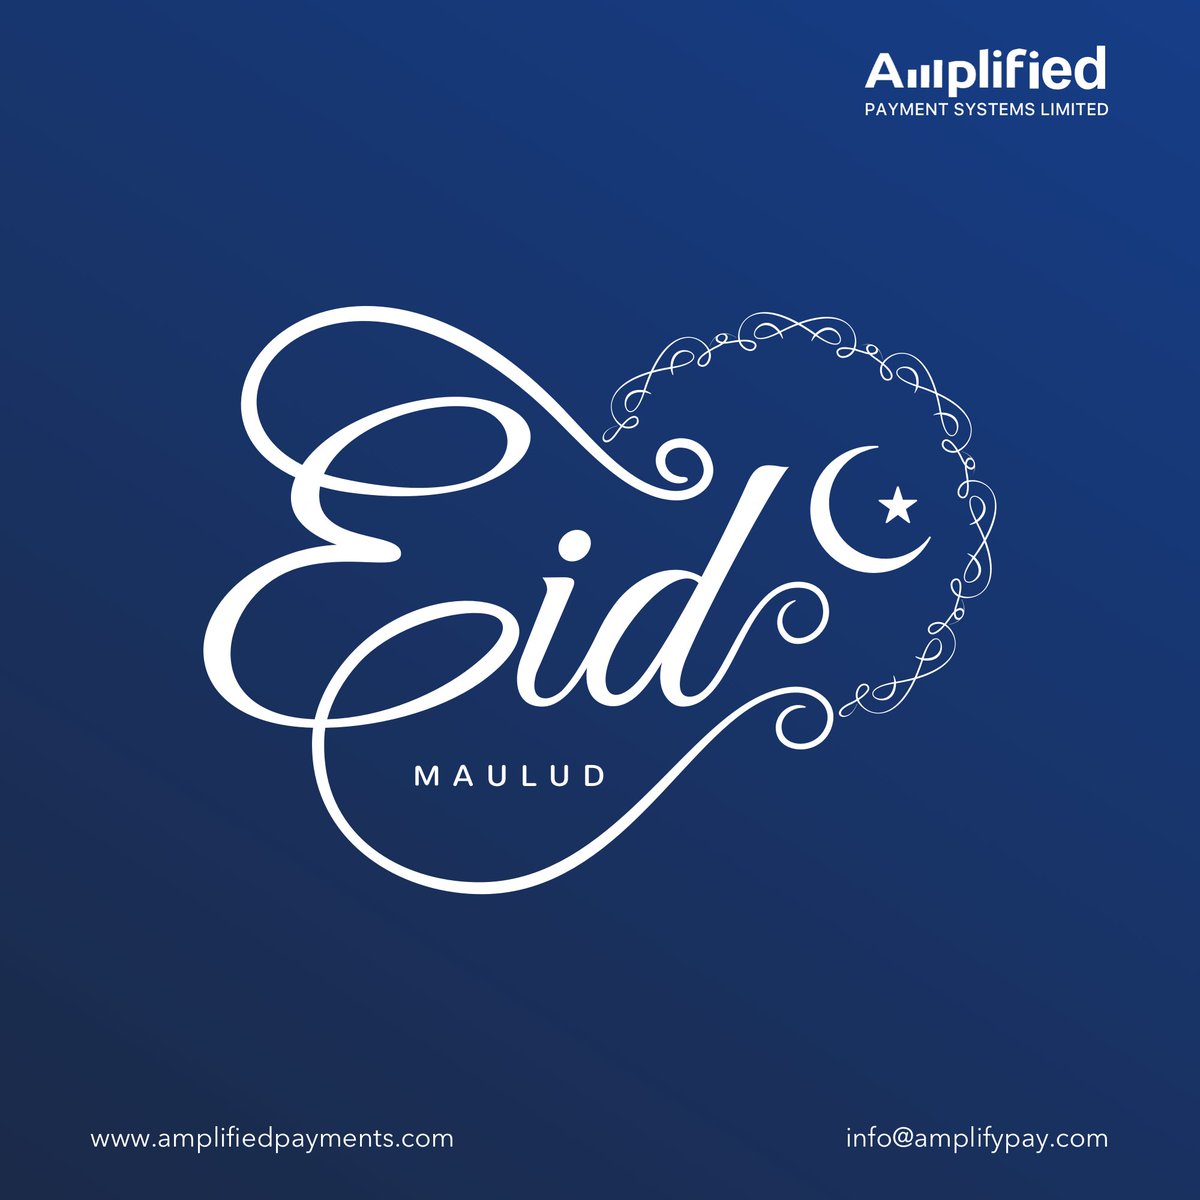 A special Eid-el-Maulud greetings to our Muslim friends. Have a great celebration from all of us at #Amplified. #EidMubarak #Eid #EidMaulud